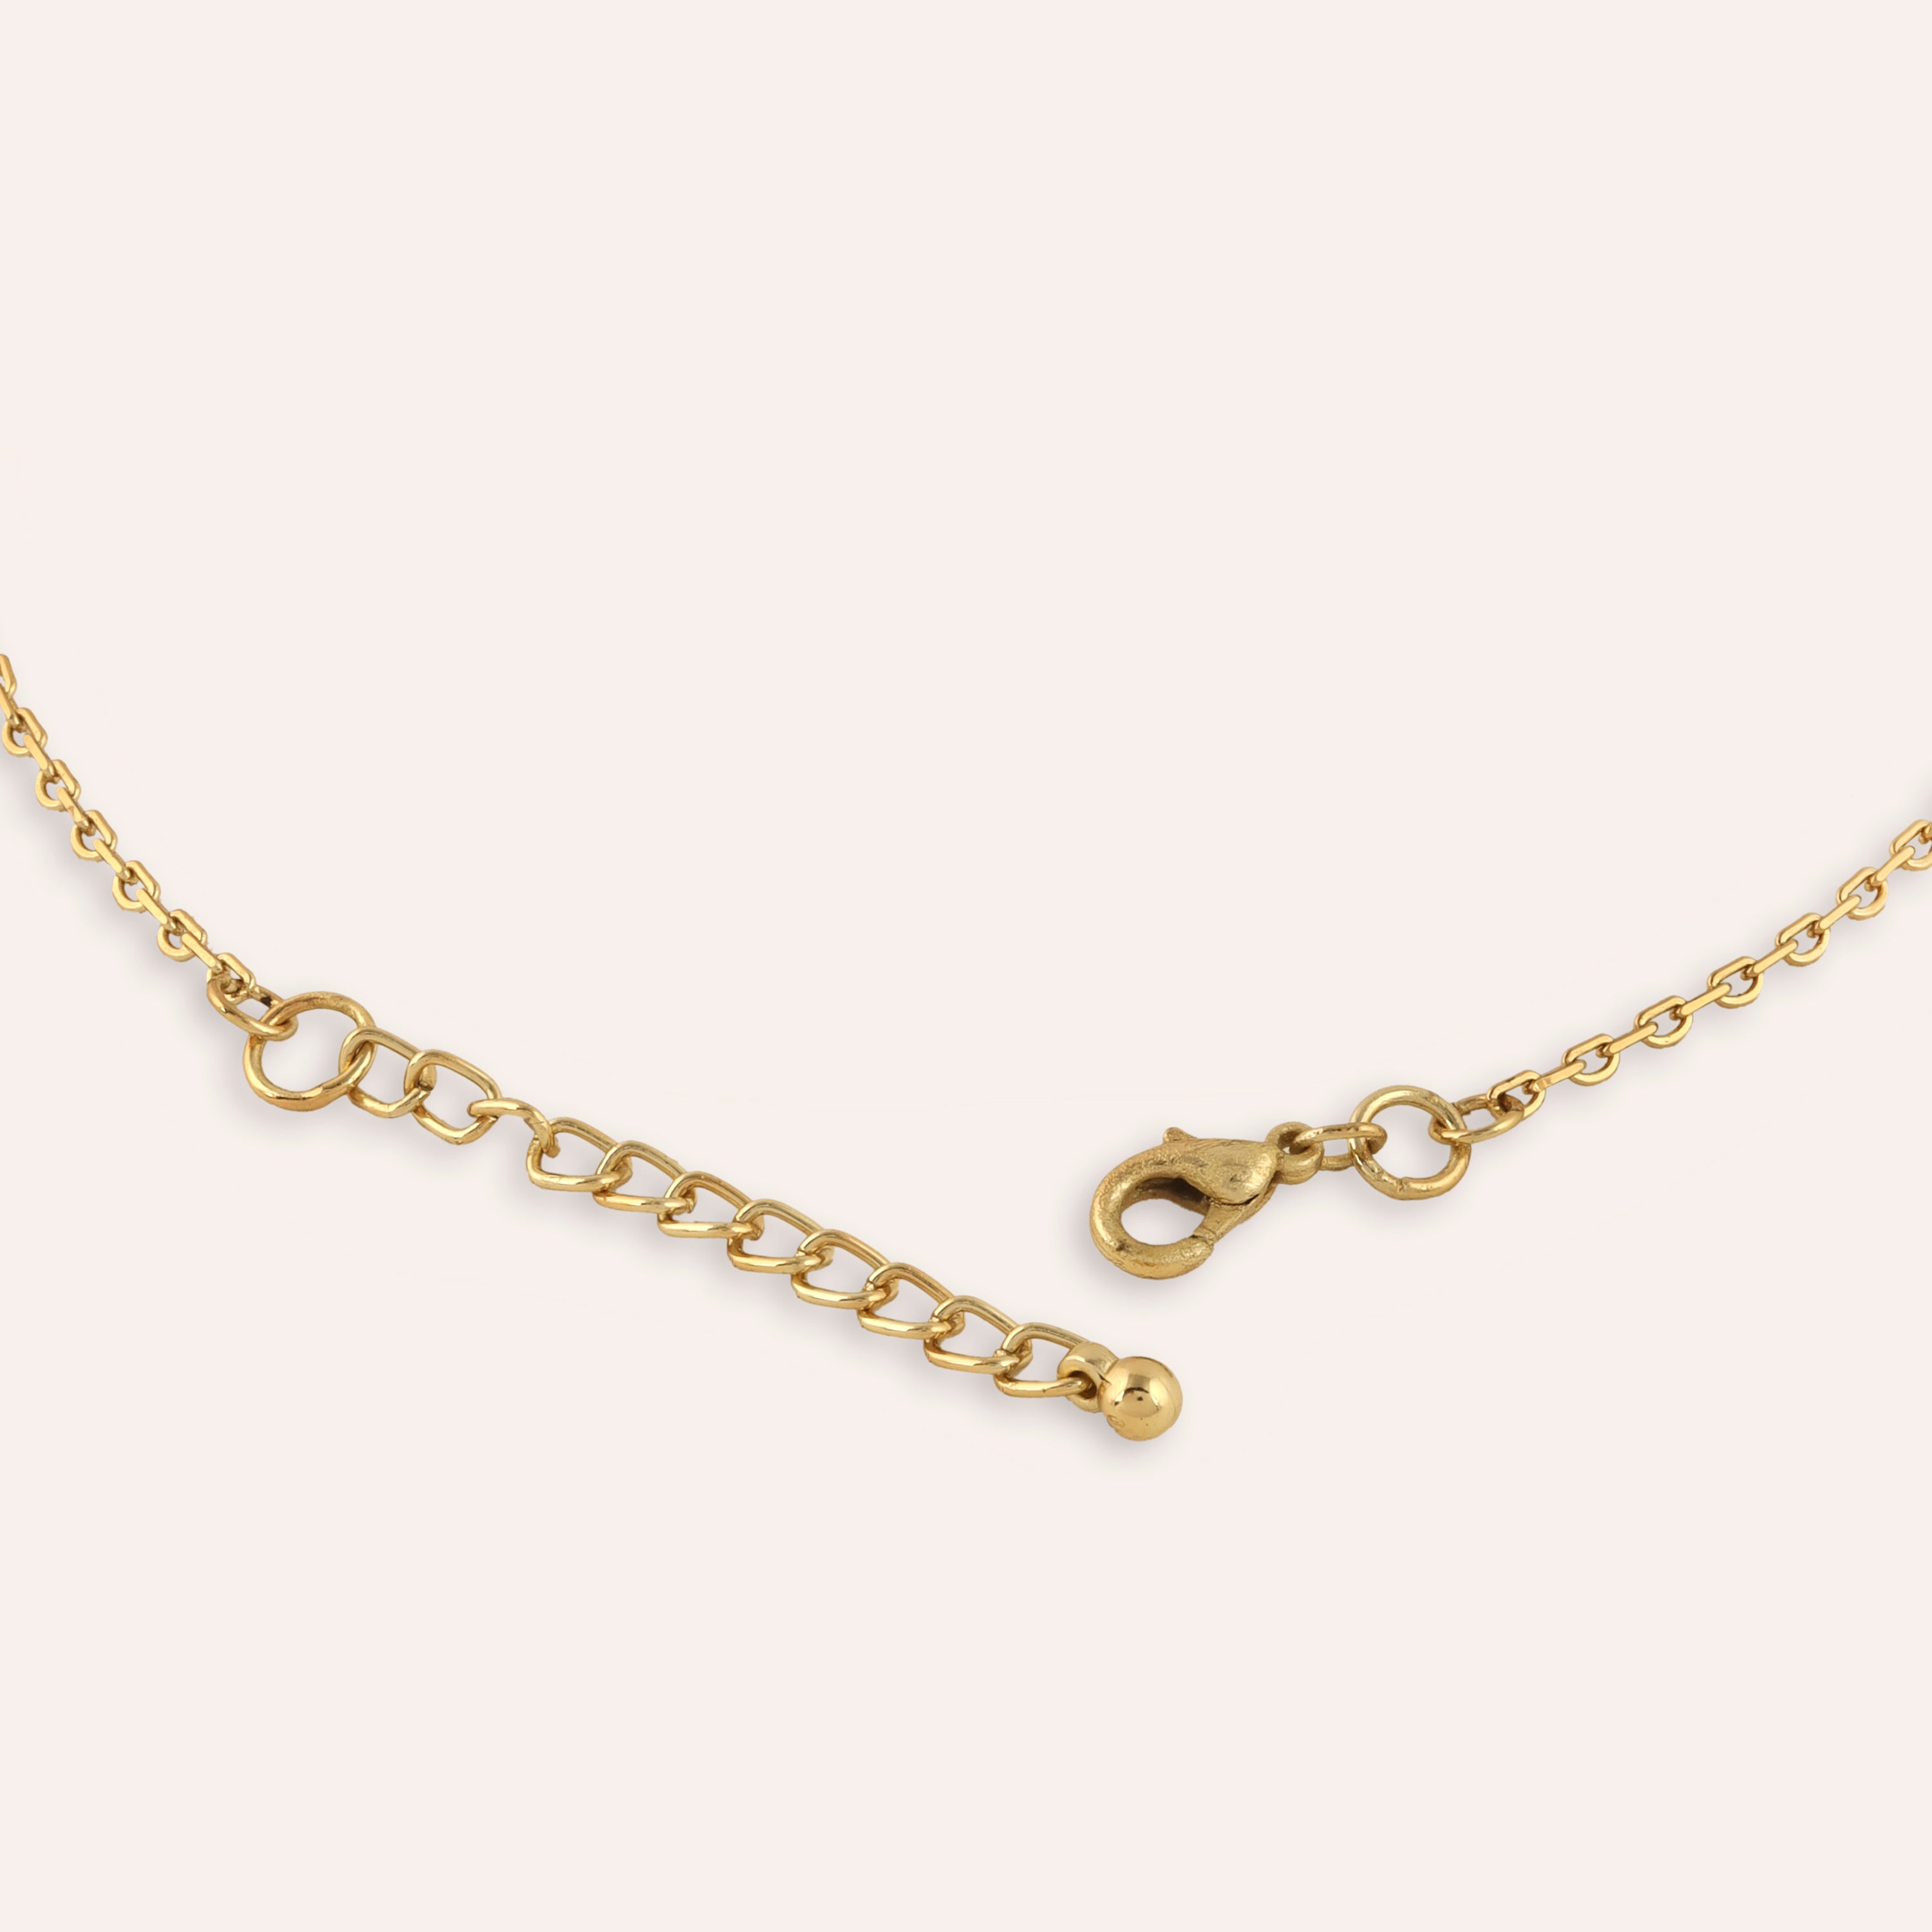 TFC Cuddle Bug Gold Plated Necklace-Enhance your elegance with our collection of gold-plated necklaces for women. Choose from stunning pendant necklaces, chic choker necklaces, and trendy layered necklaces. Our sleek and dainty designs are both affordable and anti-tarnish, ensuring lasting beauty. Enjoy the cheapest fashion jewellery, lightweight and stylish- only at The Fun Company